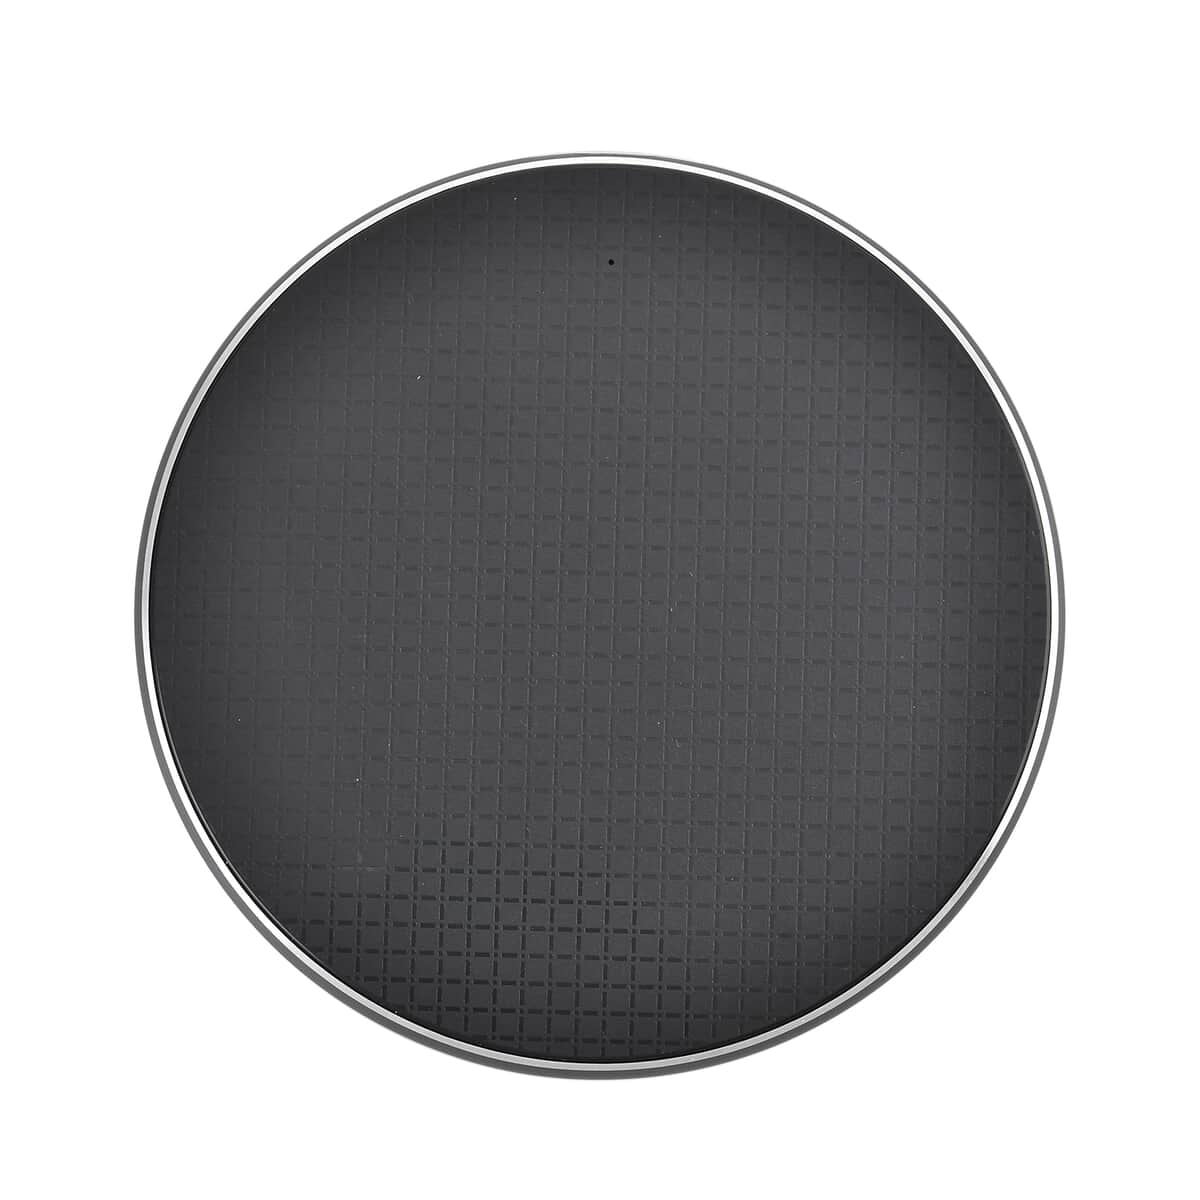 Homesmart 15W Wireless Fast Charger with 3.28 Feet USB Cable - Black, Portable Ultra Thin Fast Charging Pad With Indicator Lights image number 2